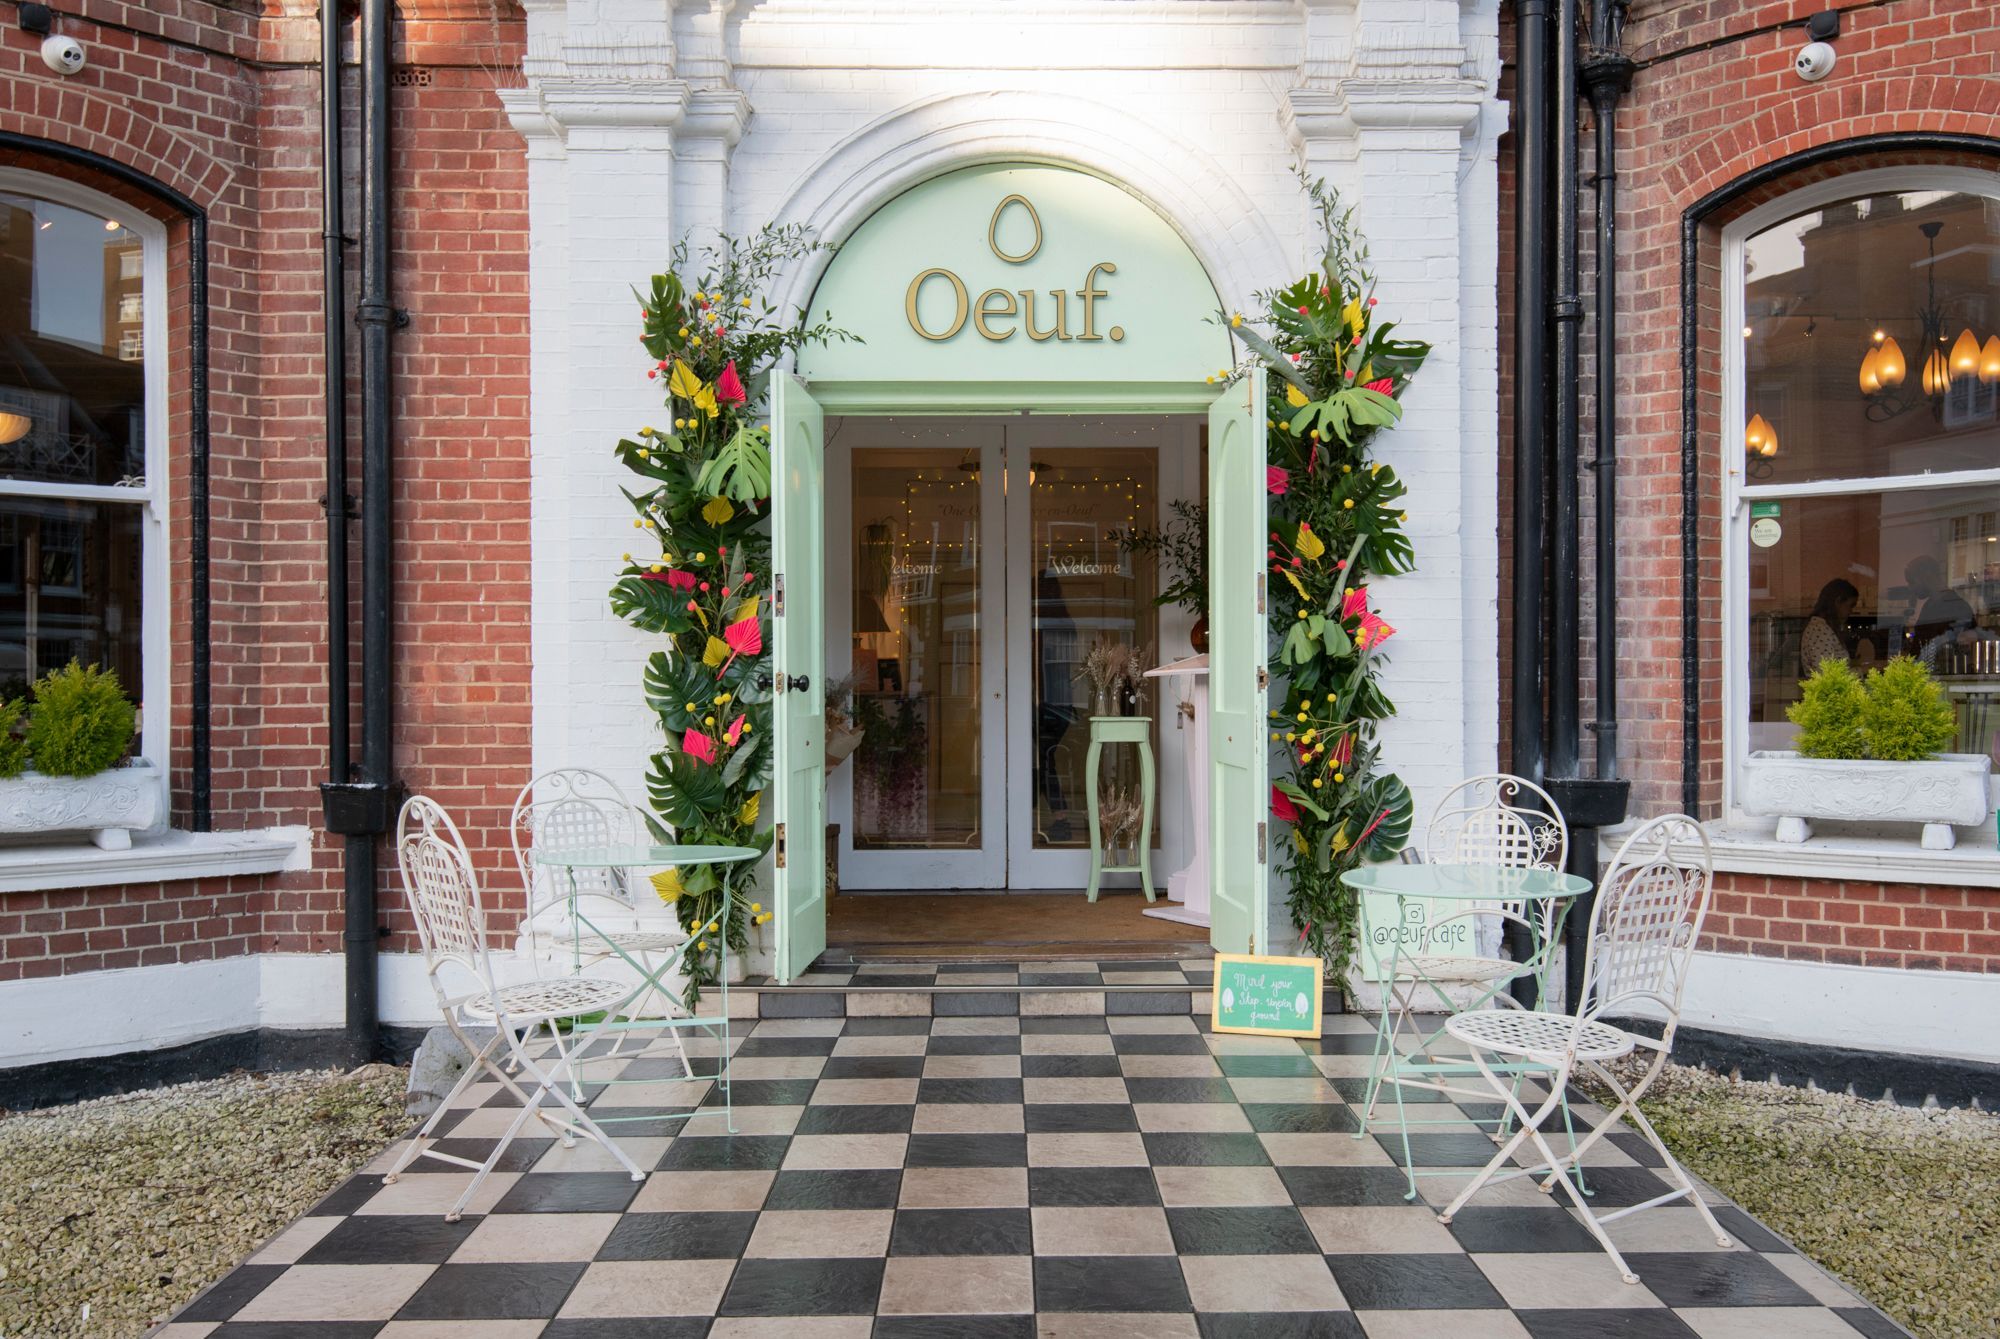 The entrance to Oeuf Cafe, Hove, a black and white tiled walkway with white metal tables and chairs flanking it. The entrance is an egg shell green door with archway and the name Oeuf in gold and a floral arch. White pillars on either side. Flanking that is a red brick facade and bay large bay windows